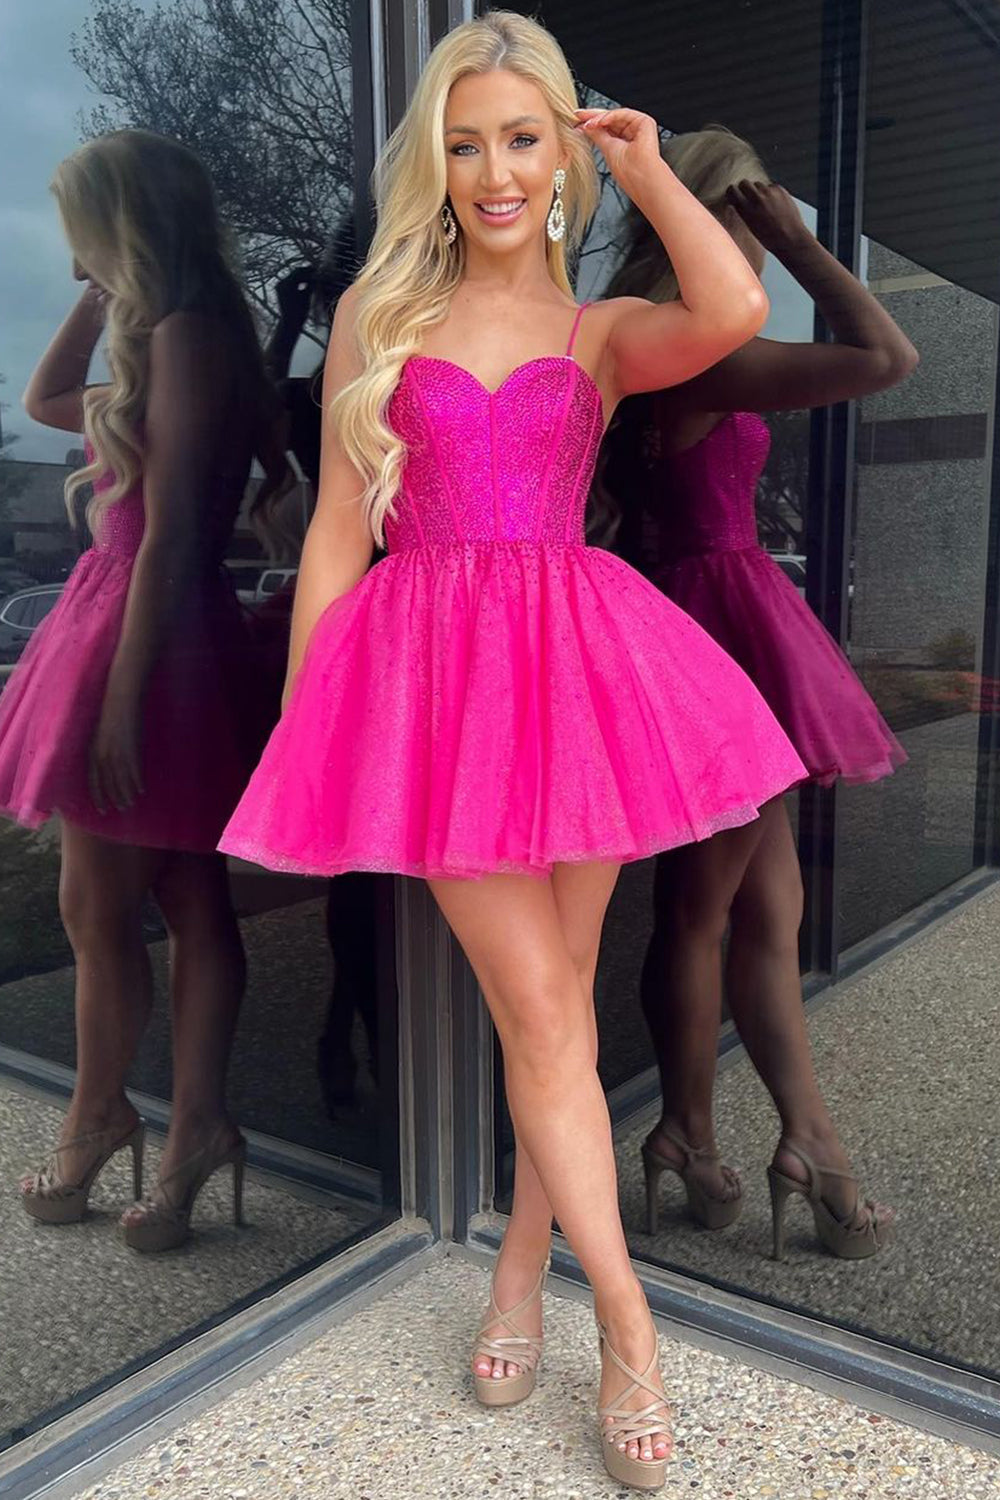 Camille |Barbie Style A Line Hot Pink Short Homecoming Dress